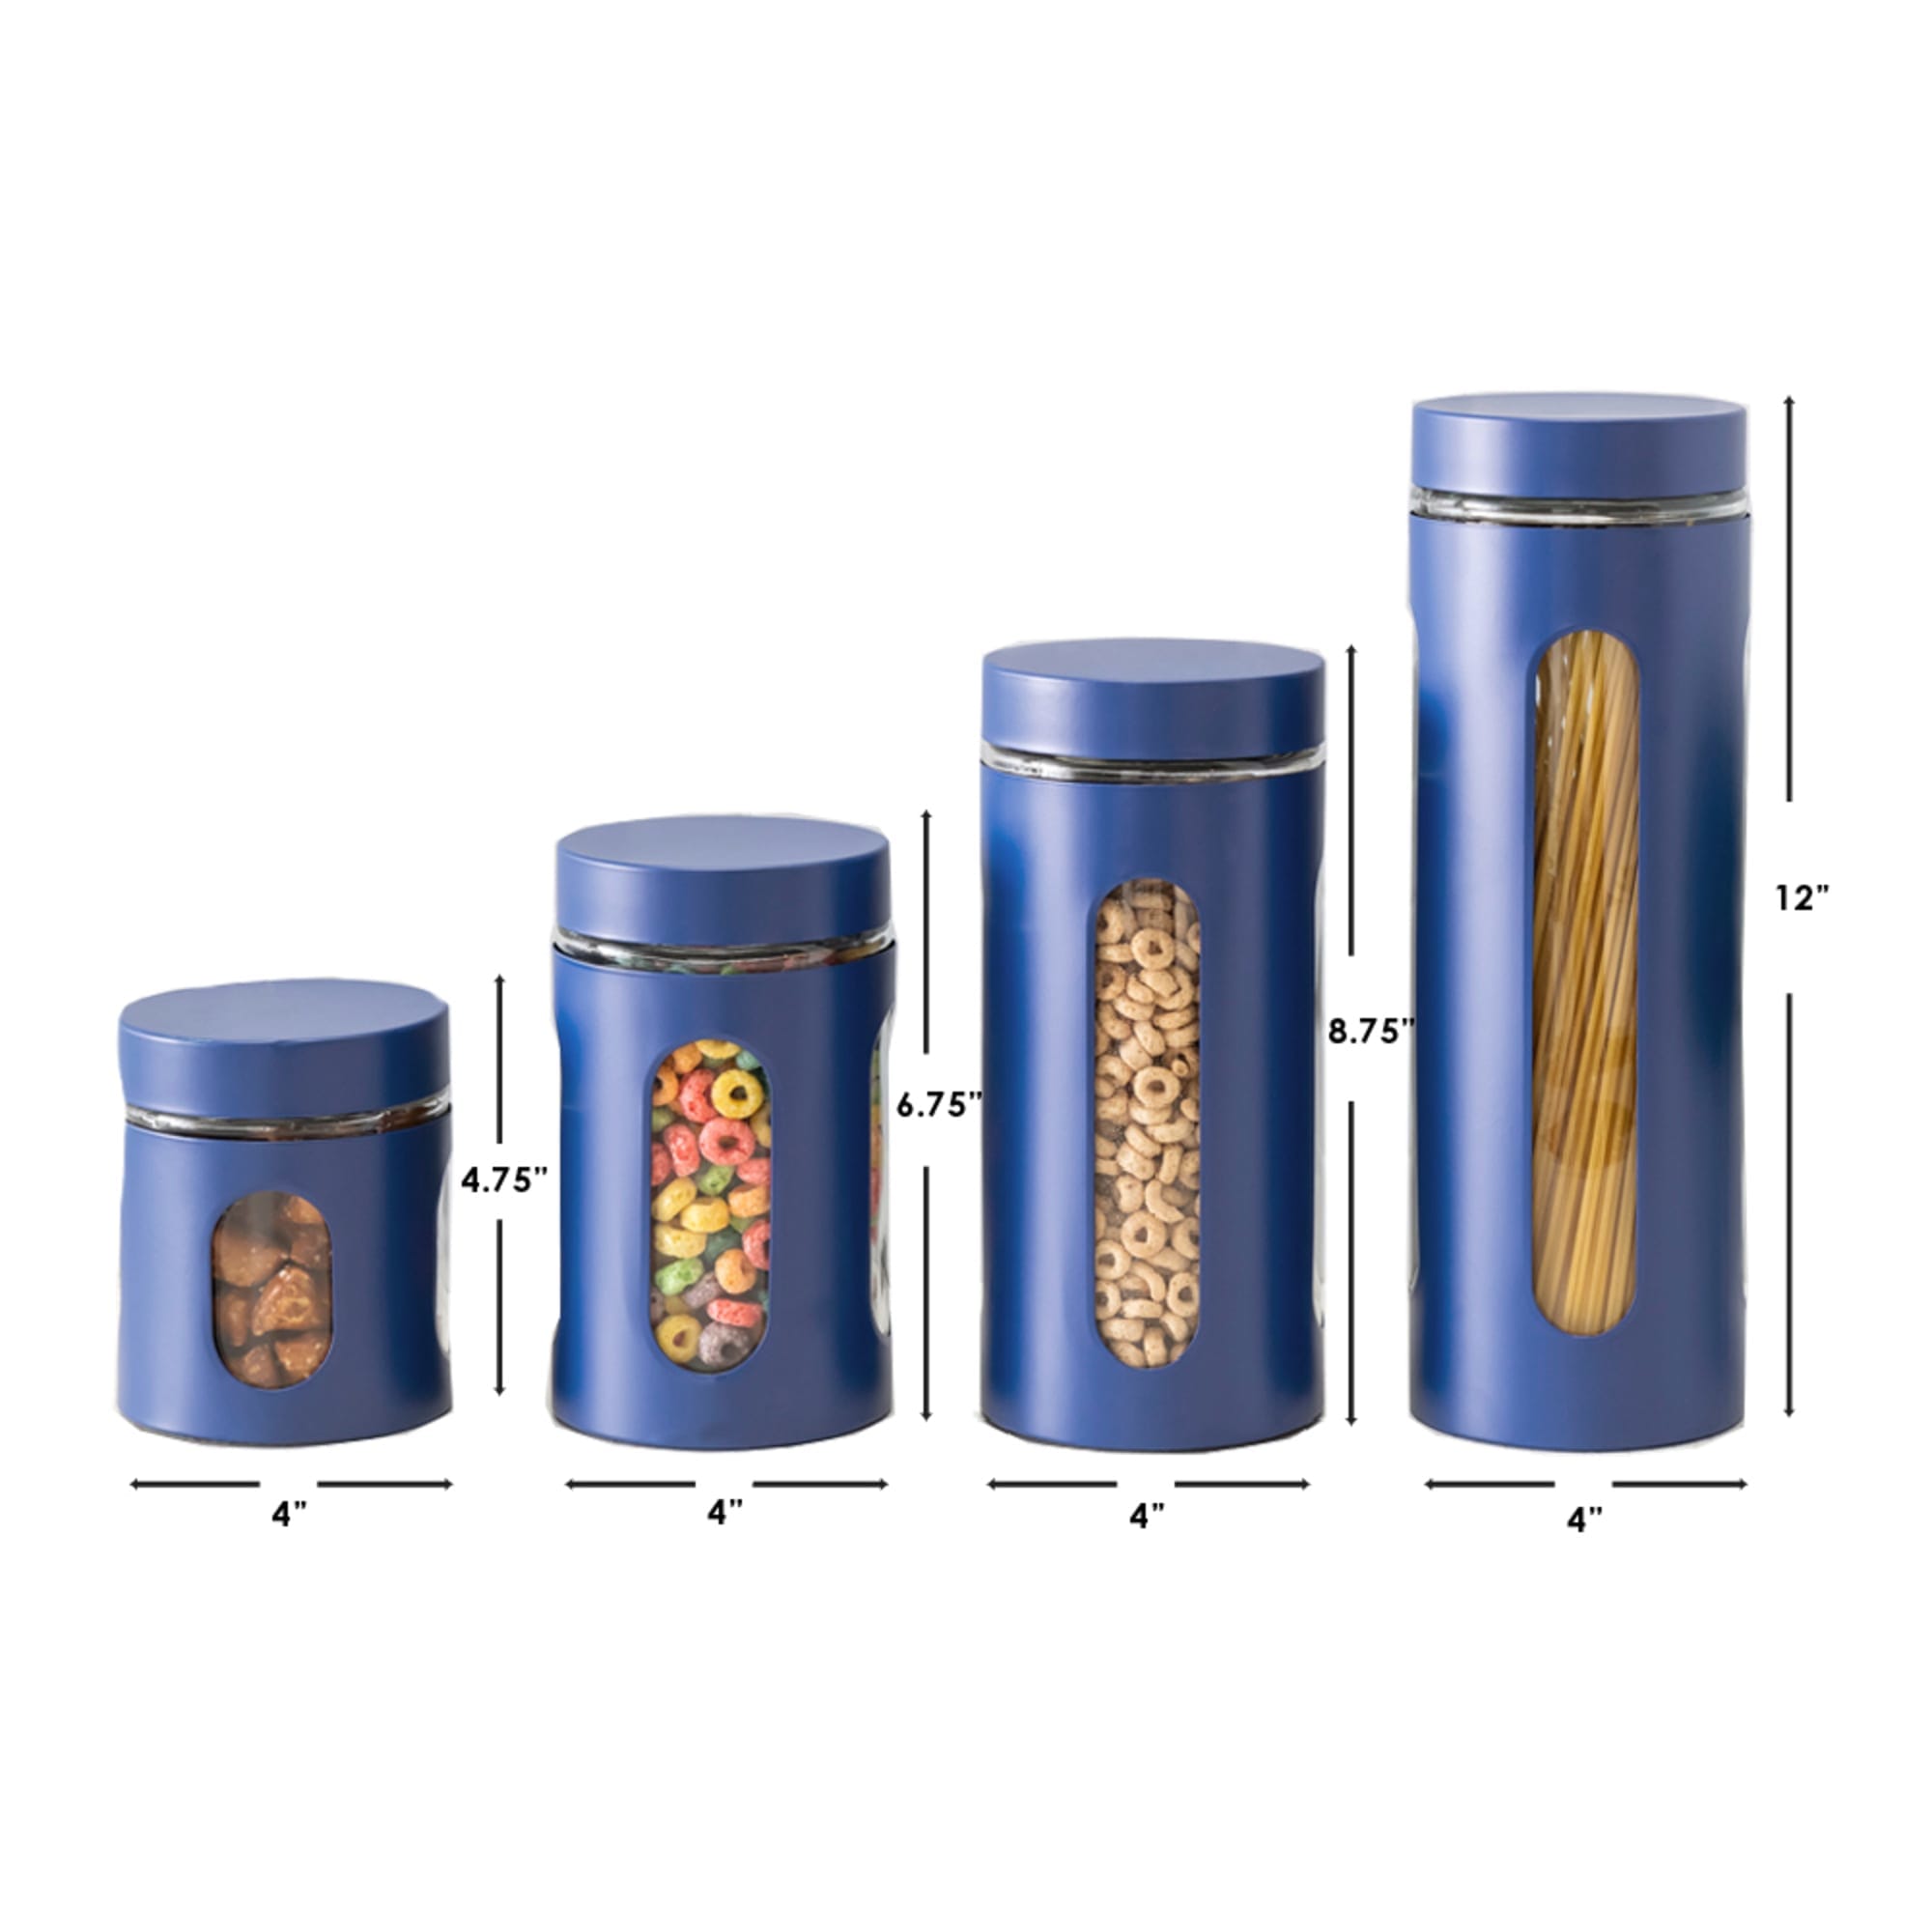 Home Basics 4 Piece Metal Canisters with Multiple Peek-Through Windows, Navy $12.00 EACH, CASE PACK OF 4